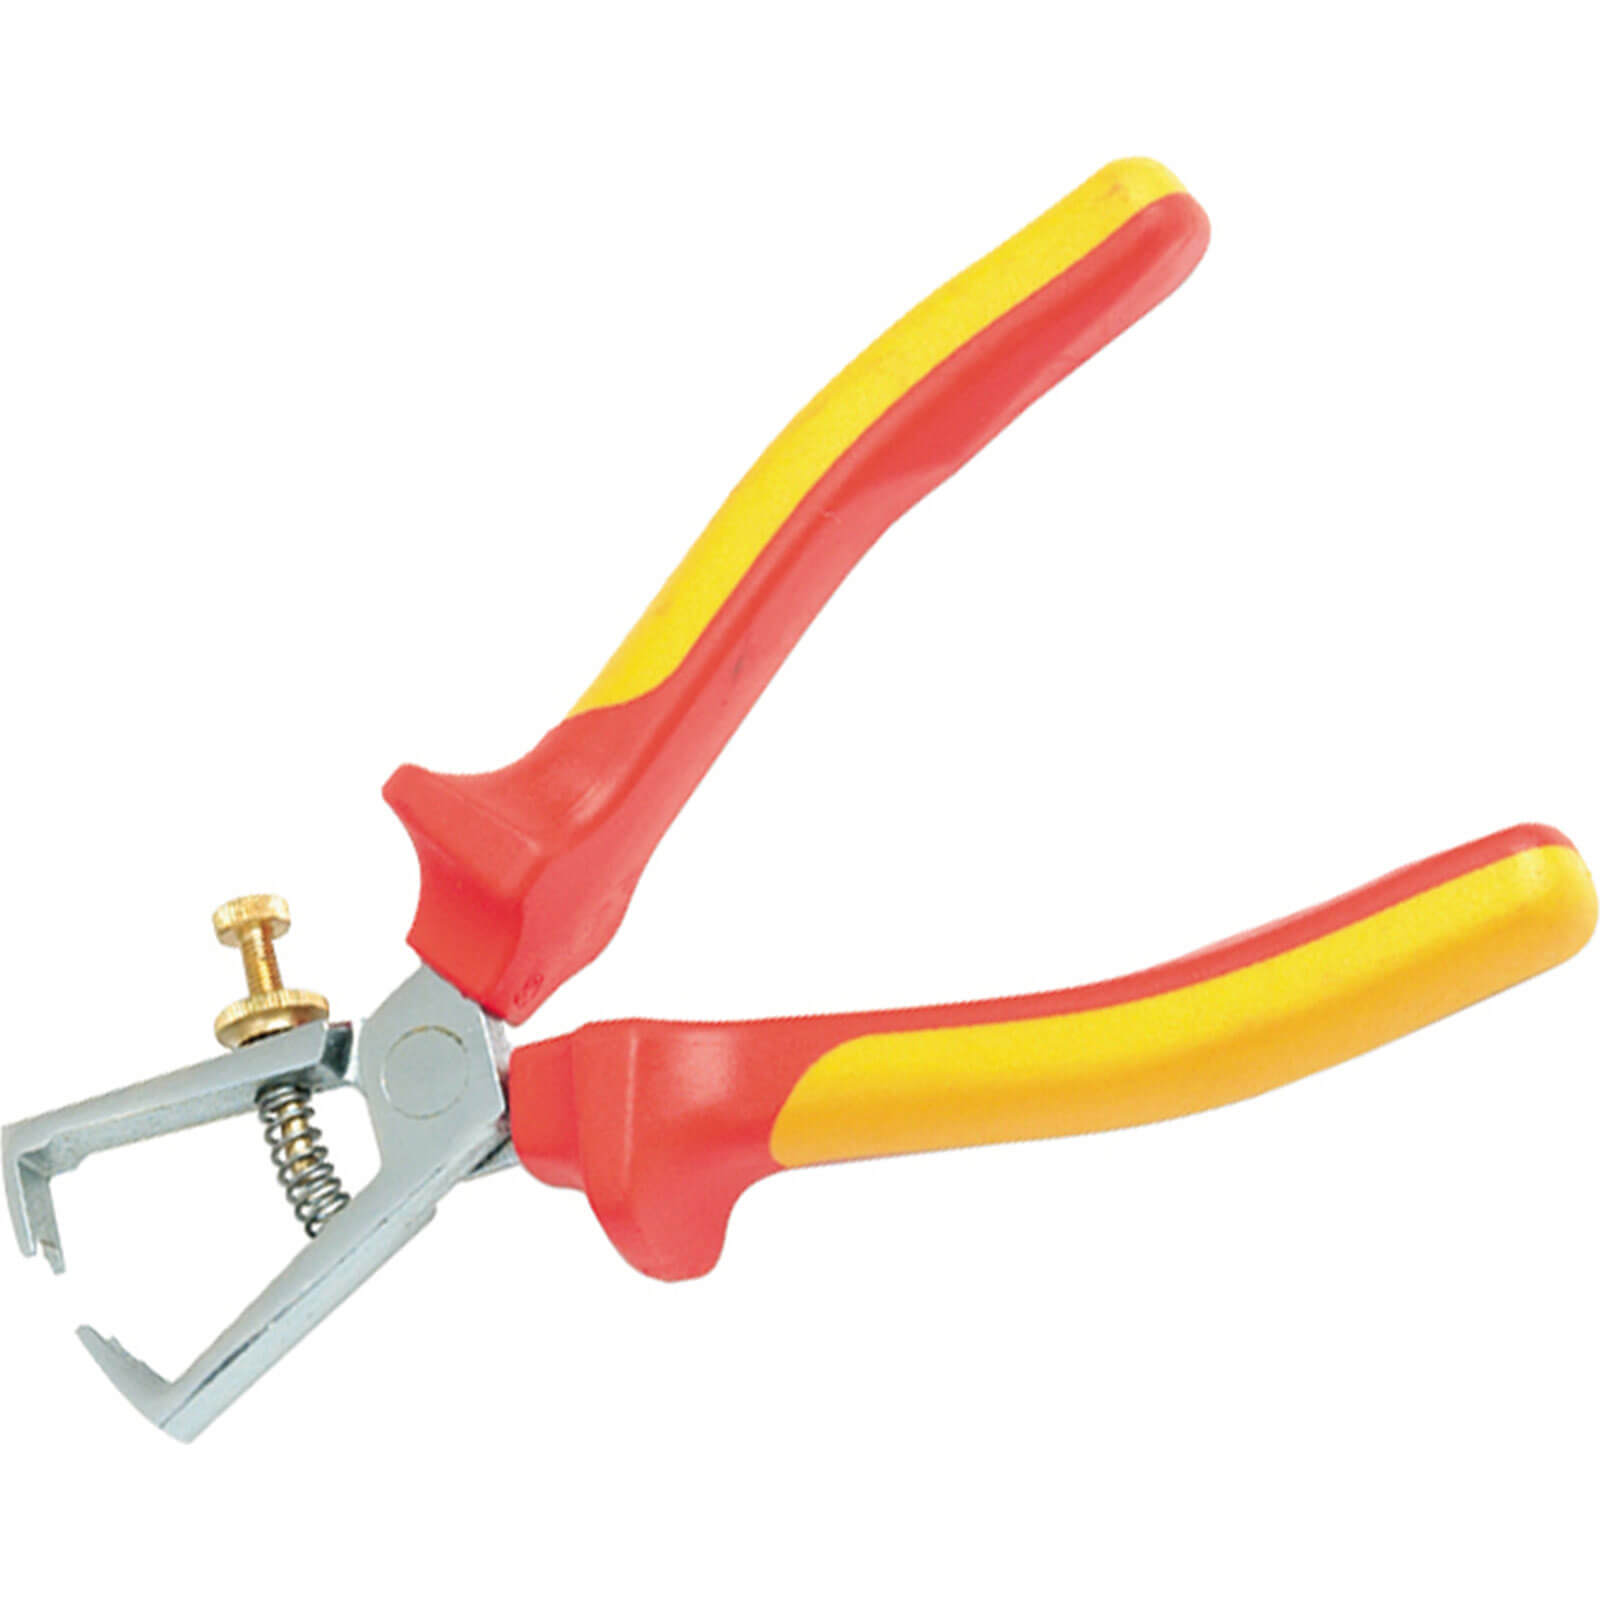 Image of Stanley Insulated Wire Stripping Pliers 170mm